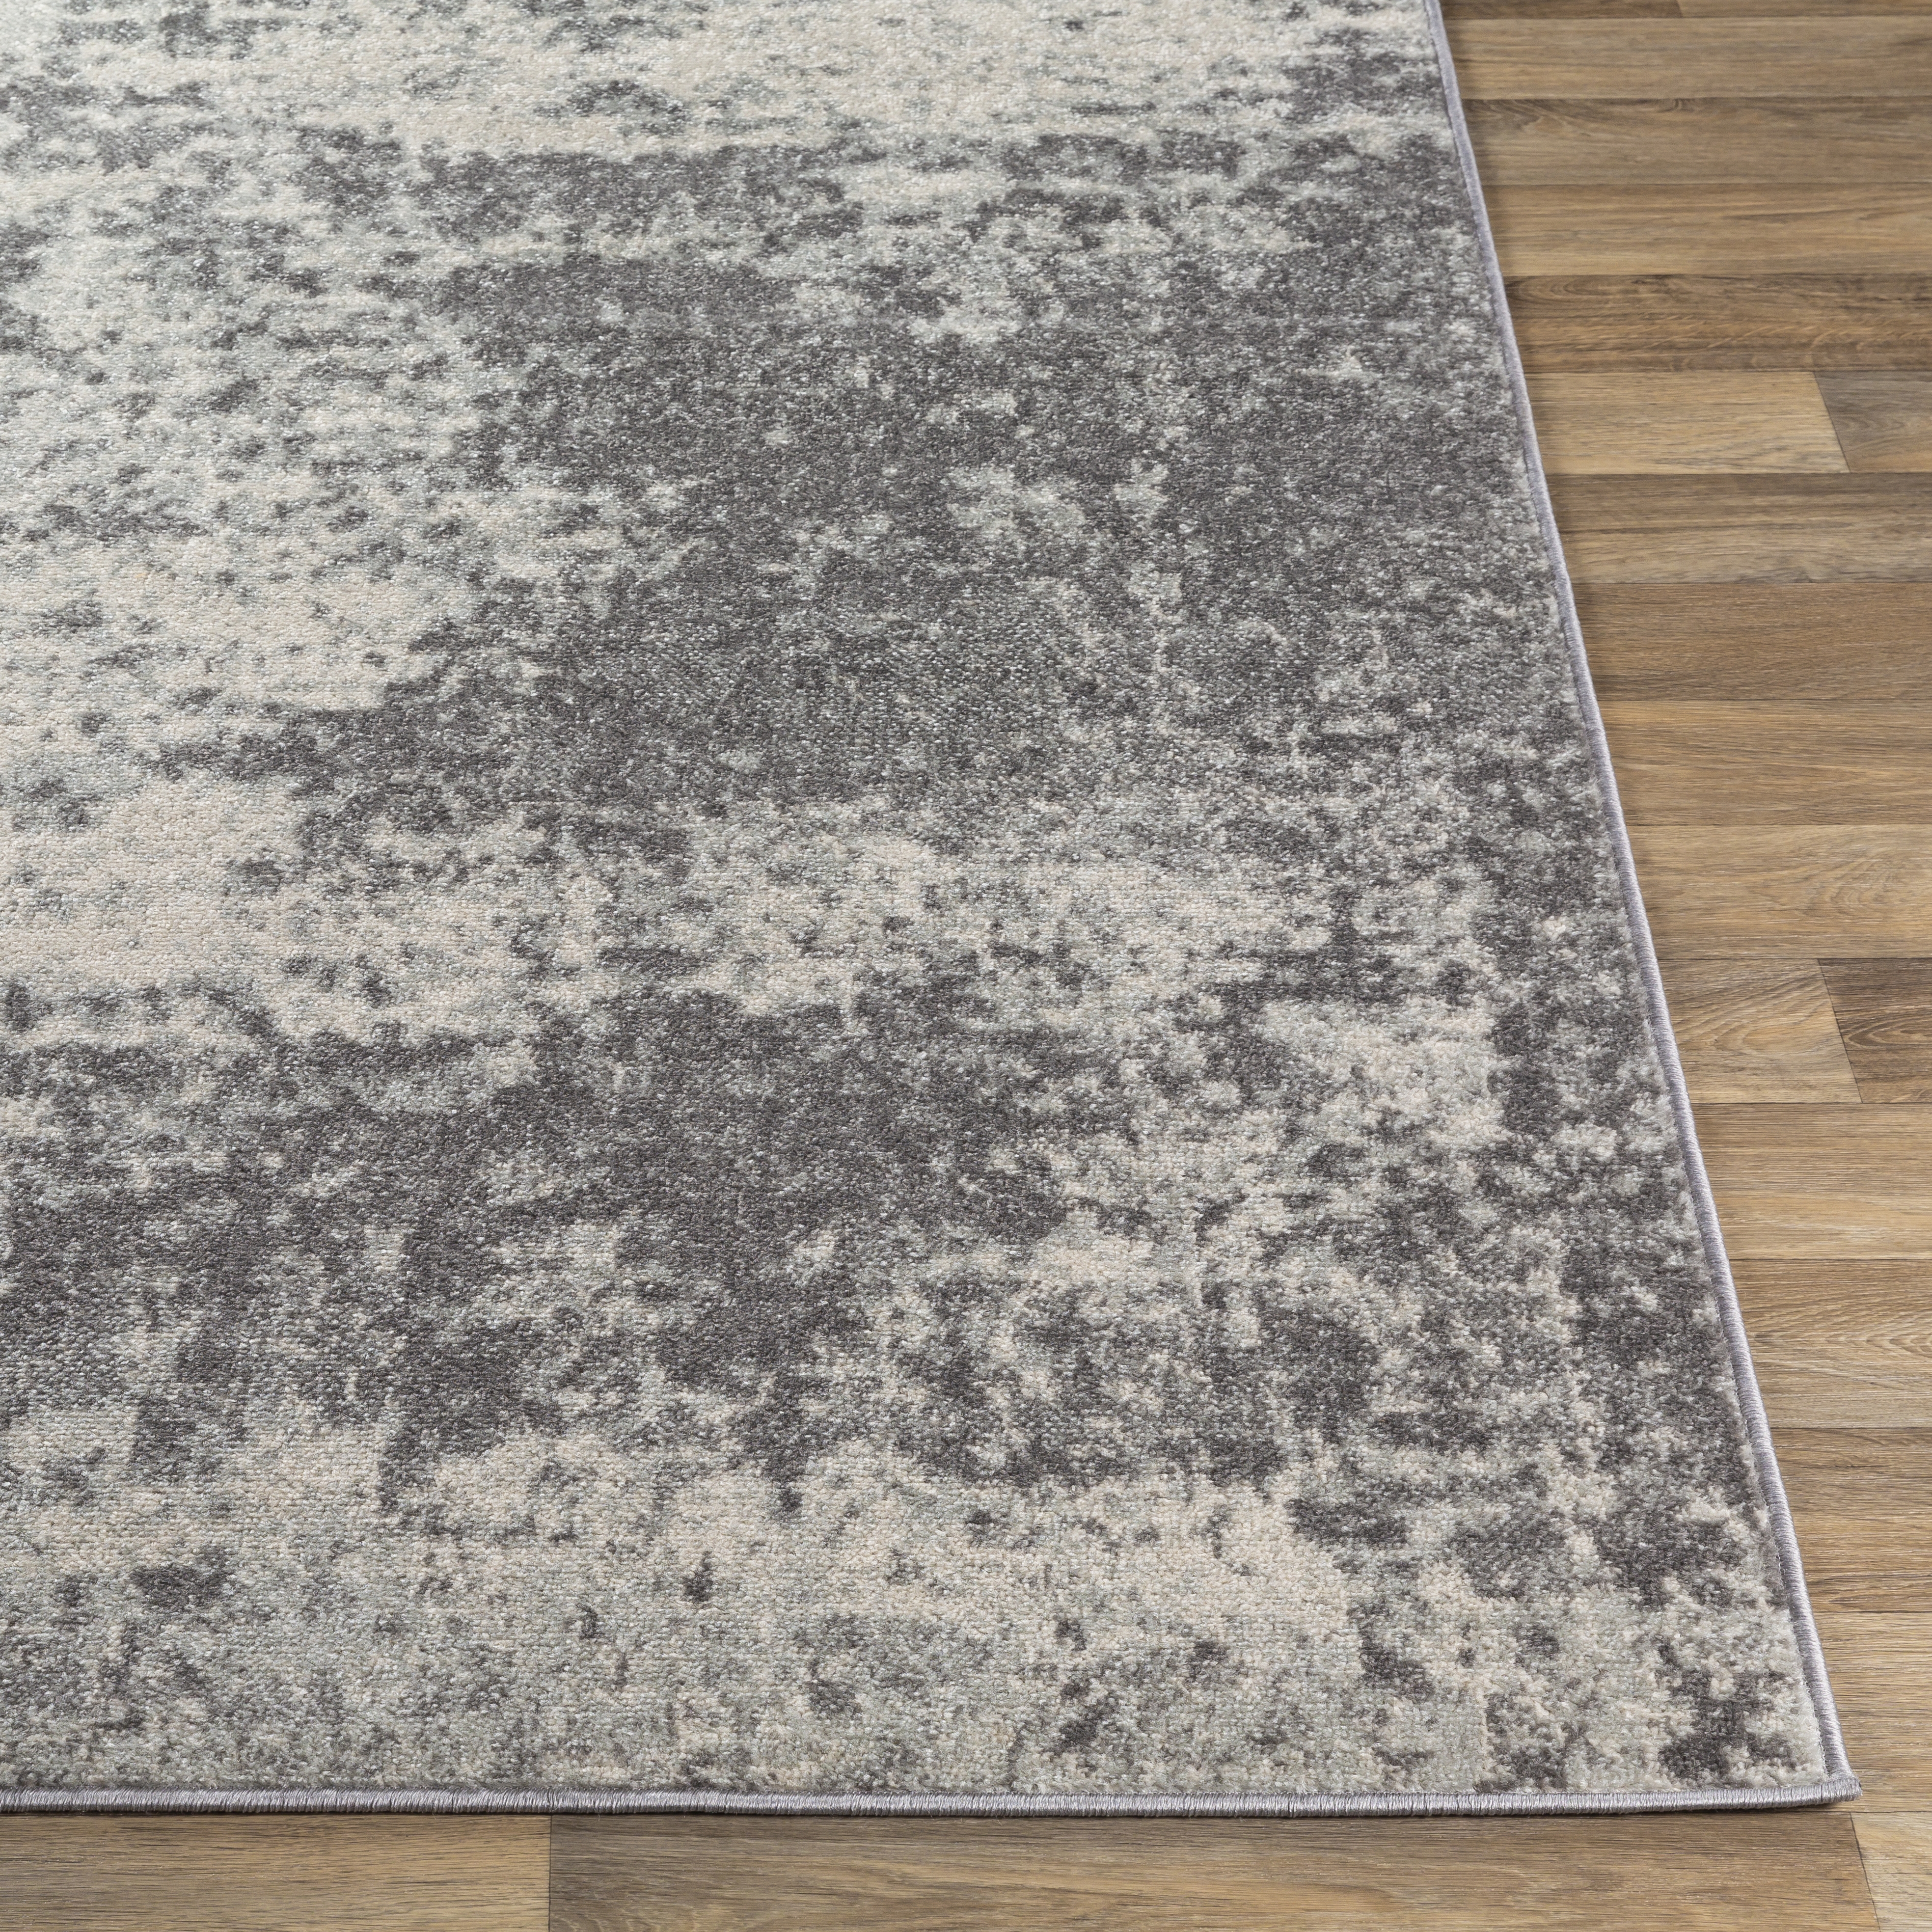 Chester Rug, 6'7" x 9', Gray - Image 4